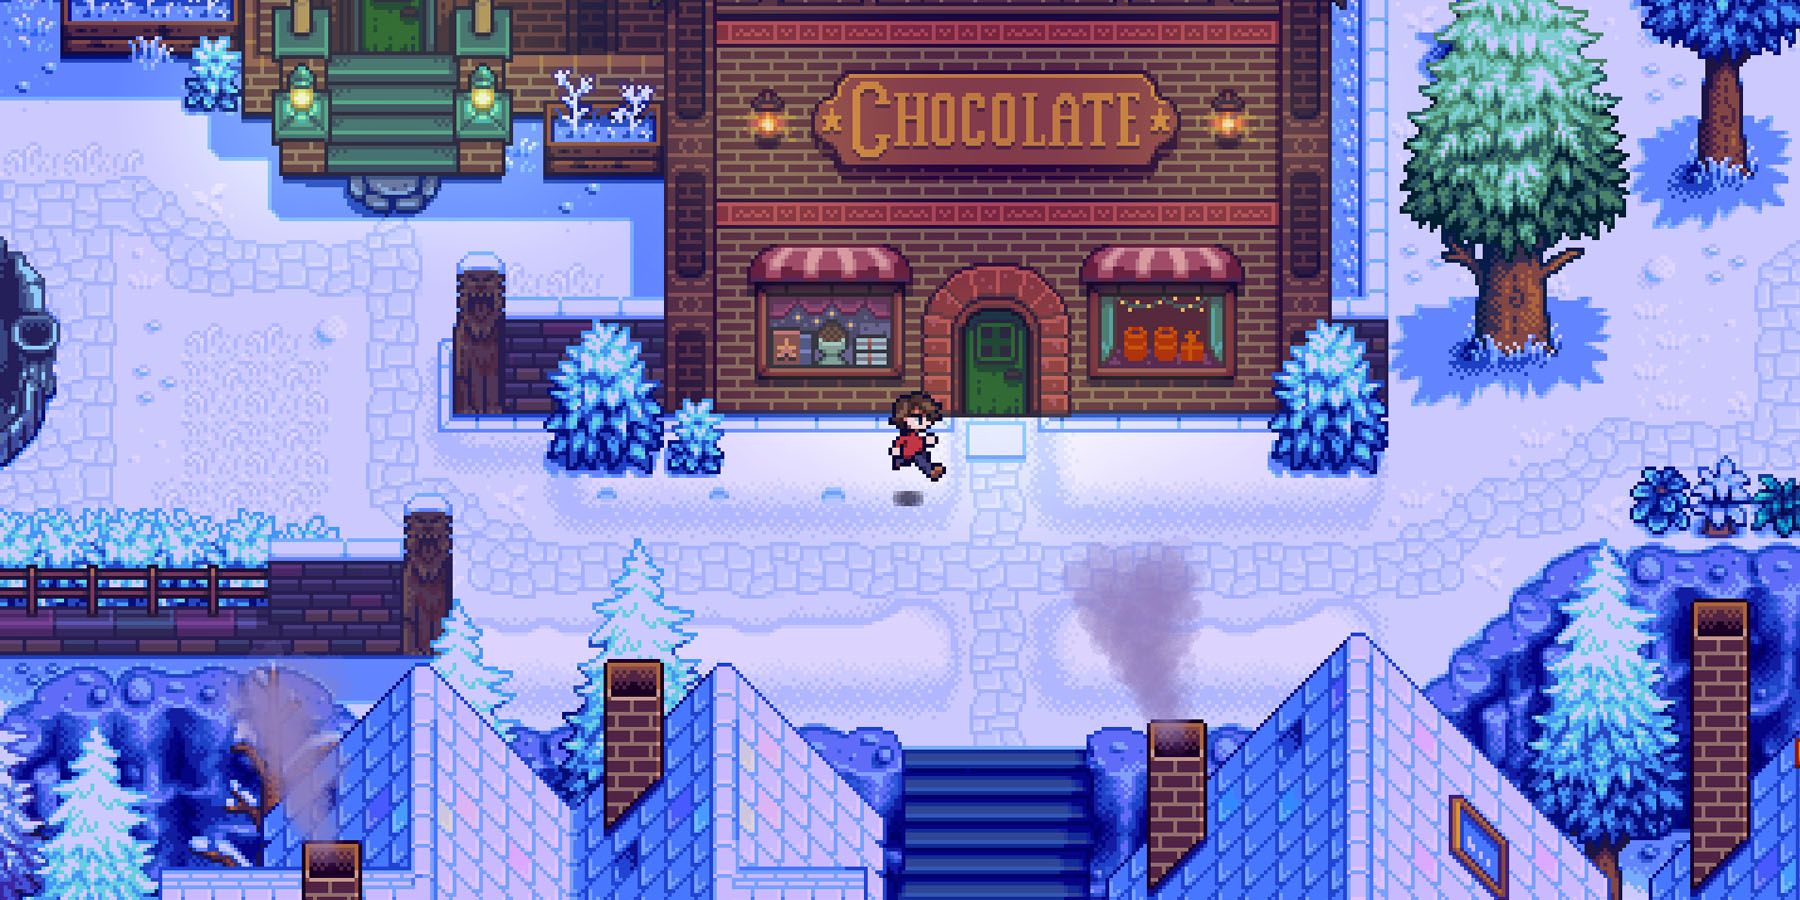 Stardew Valley Creator Teases New Game Haunted Chocolatier With New Image